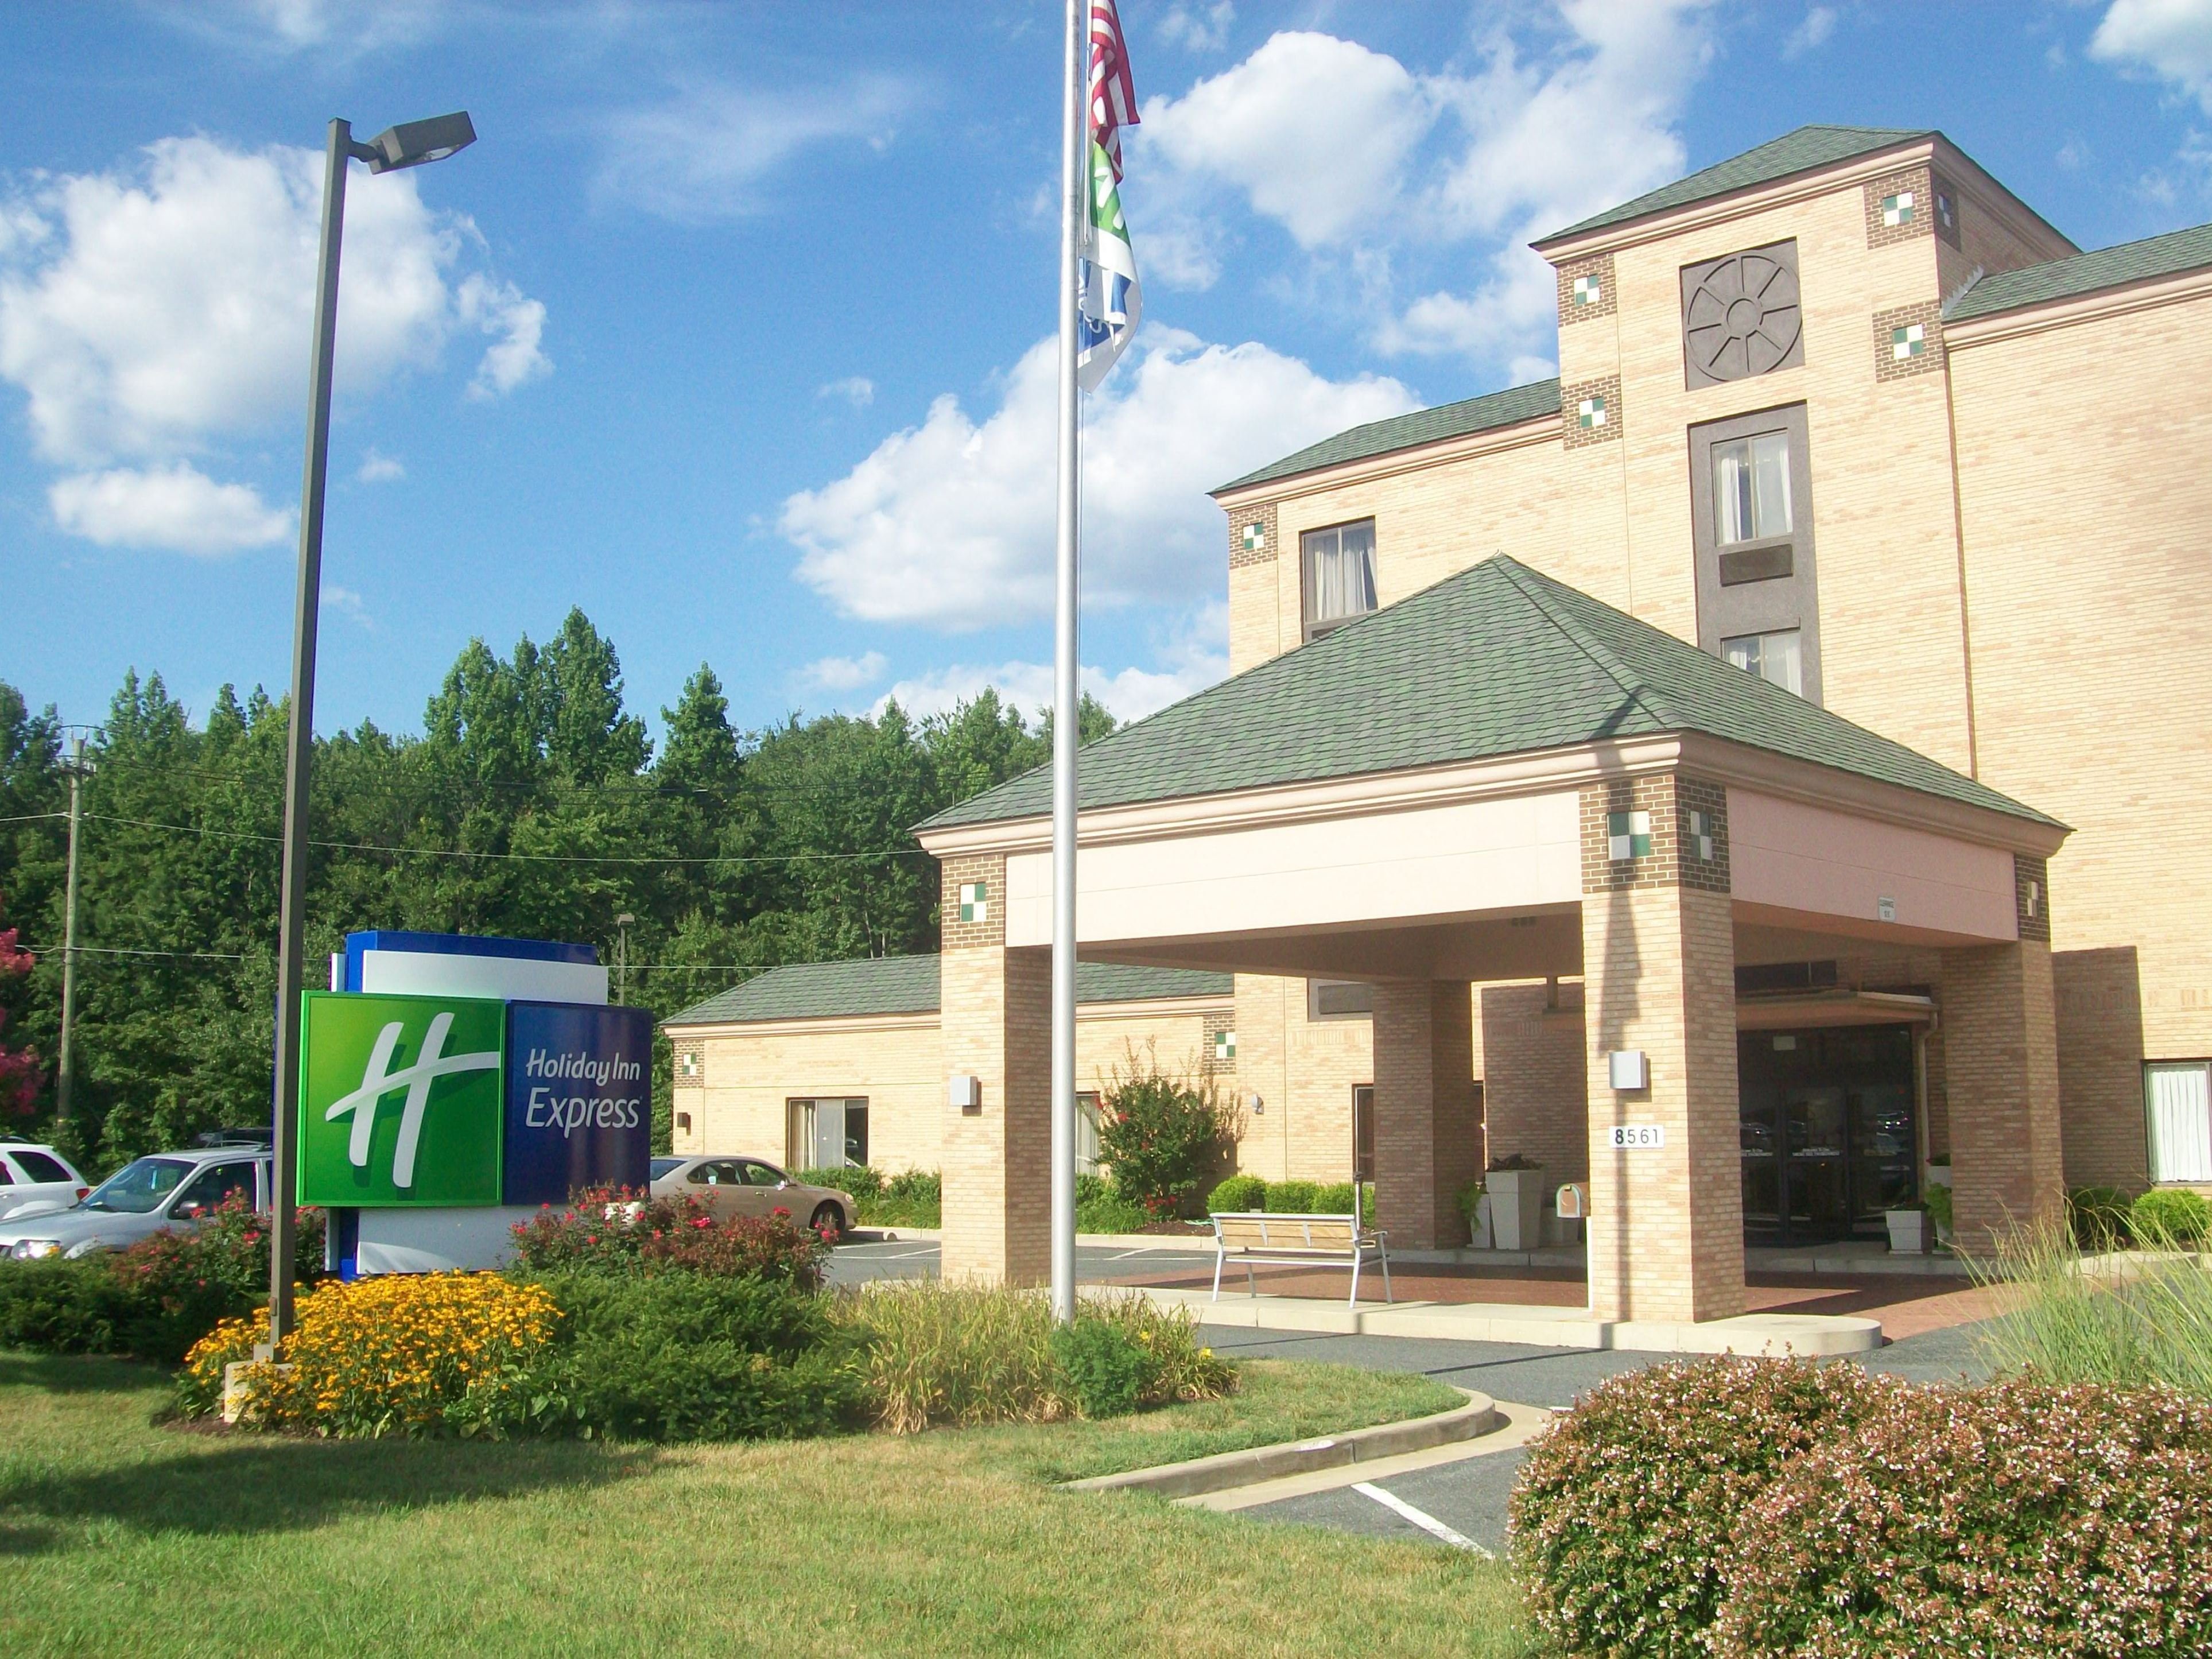 YOU HAVE ARRIVED AT THE HOLIDAY INN EXPRESS EASTON!